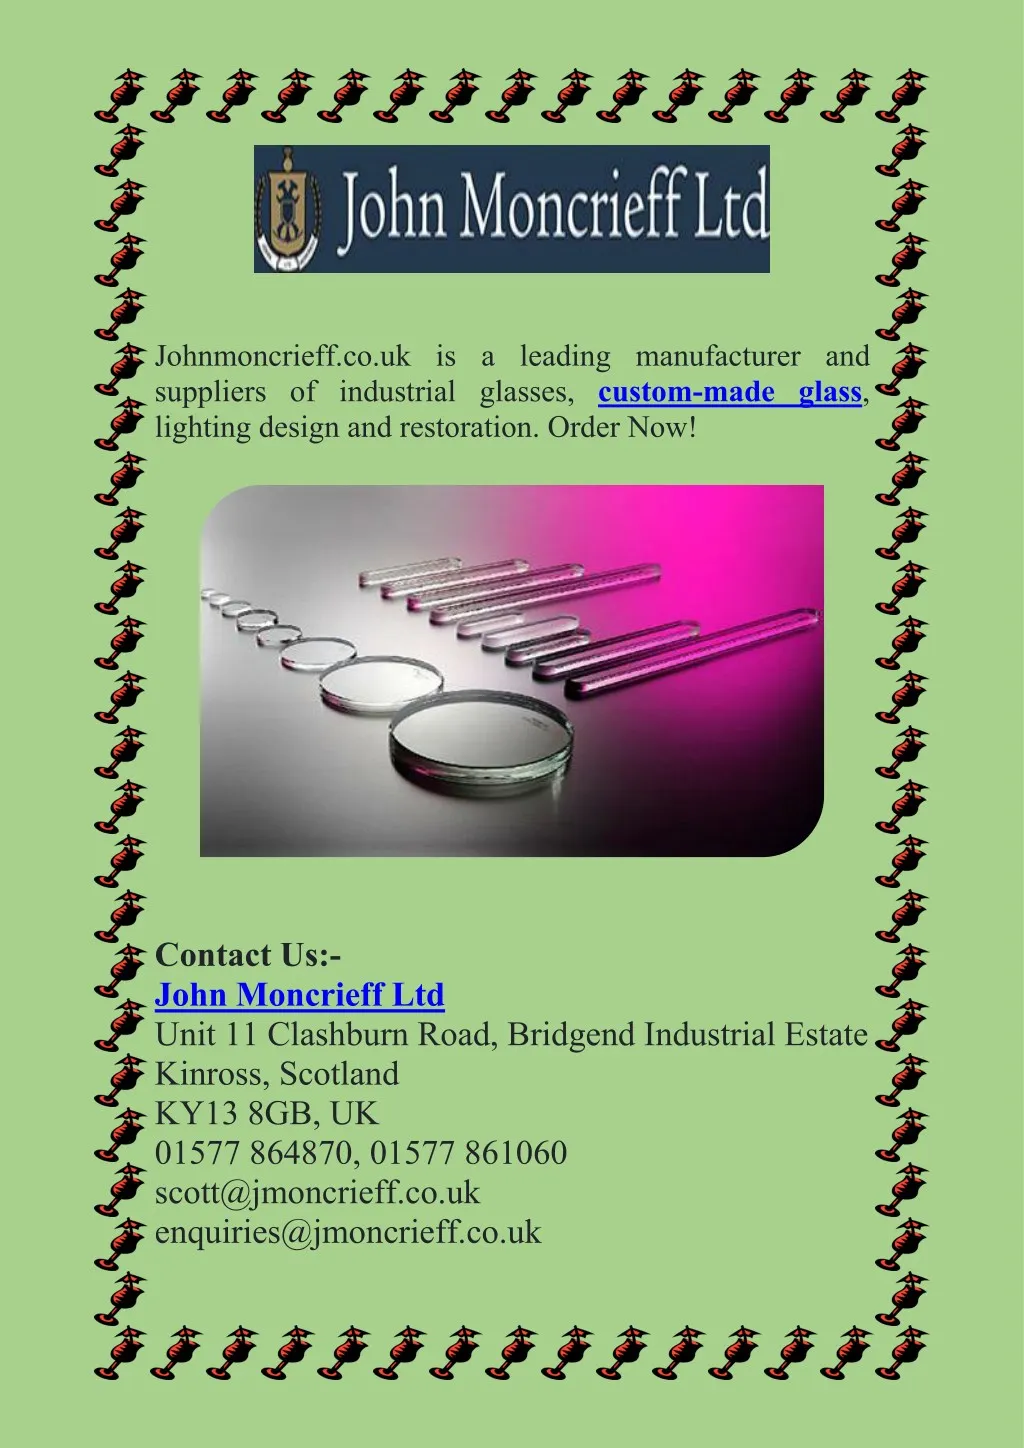 johnmoncrieff co uk is a leading manufacturer